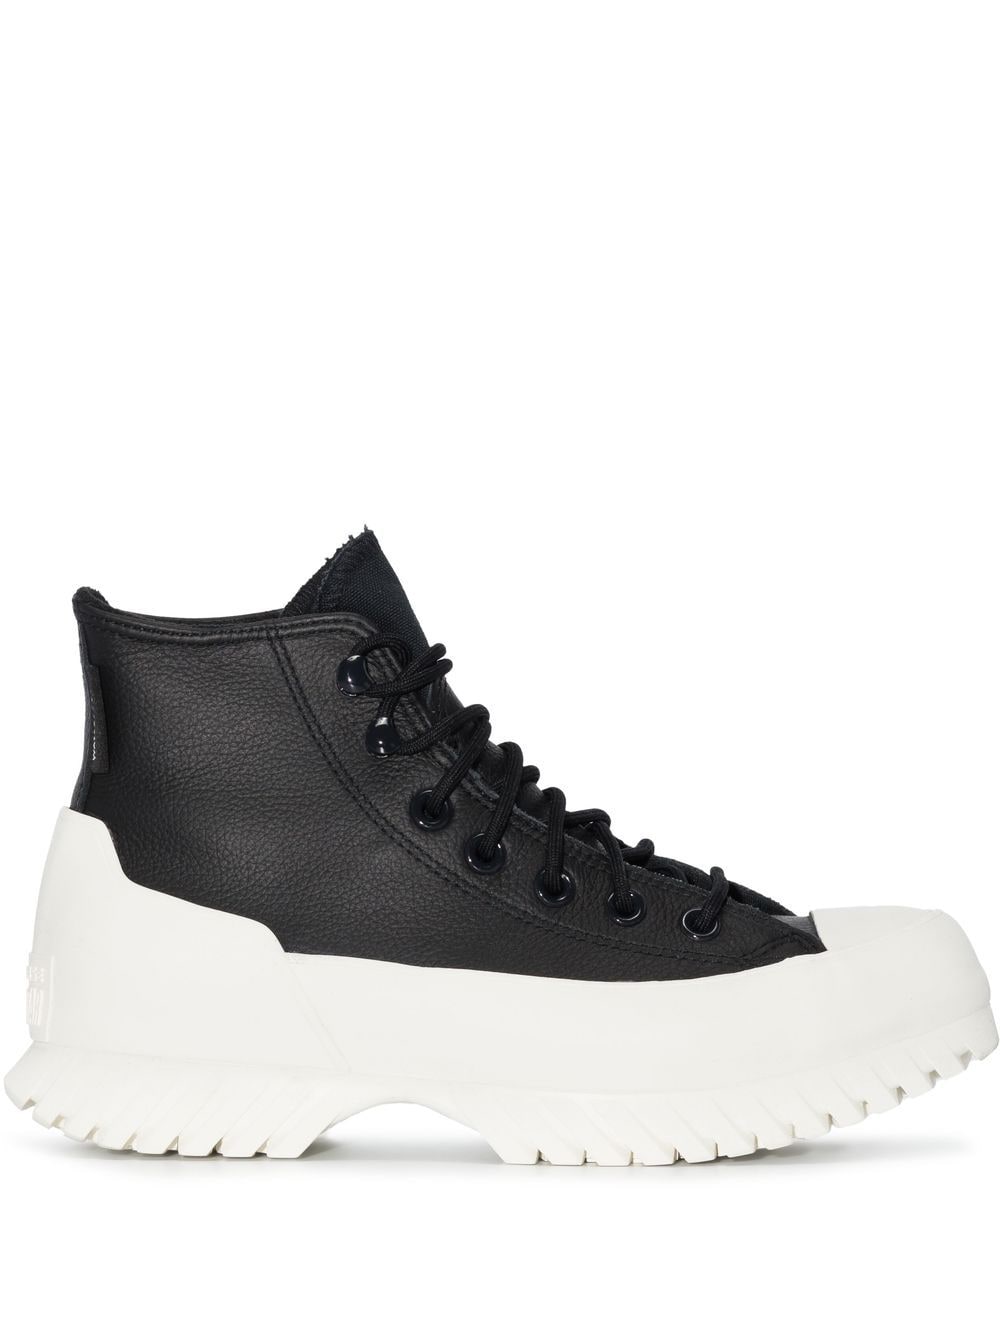 Converse Chuck Taylor All Star Lugged sneakers - Black von Converse